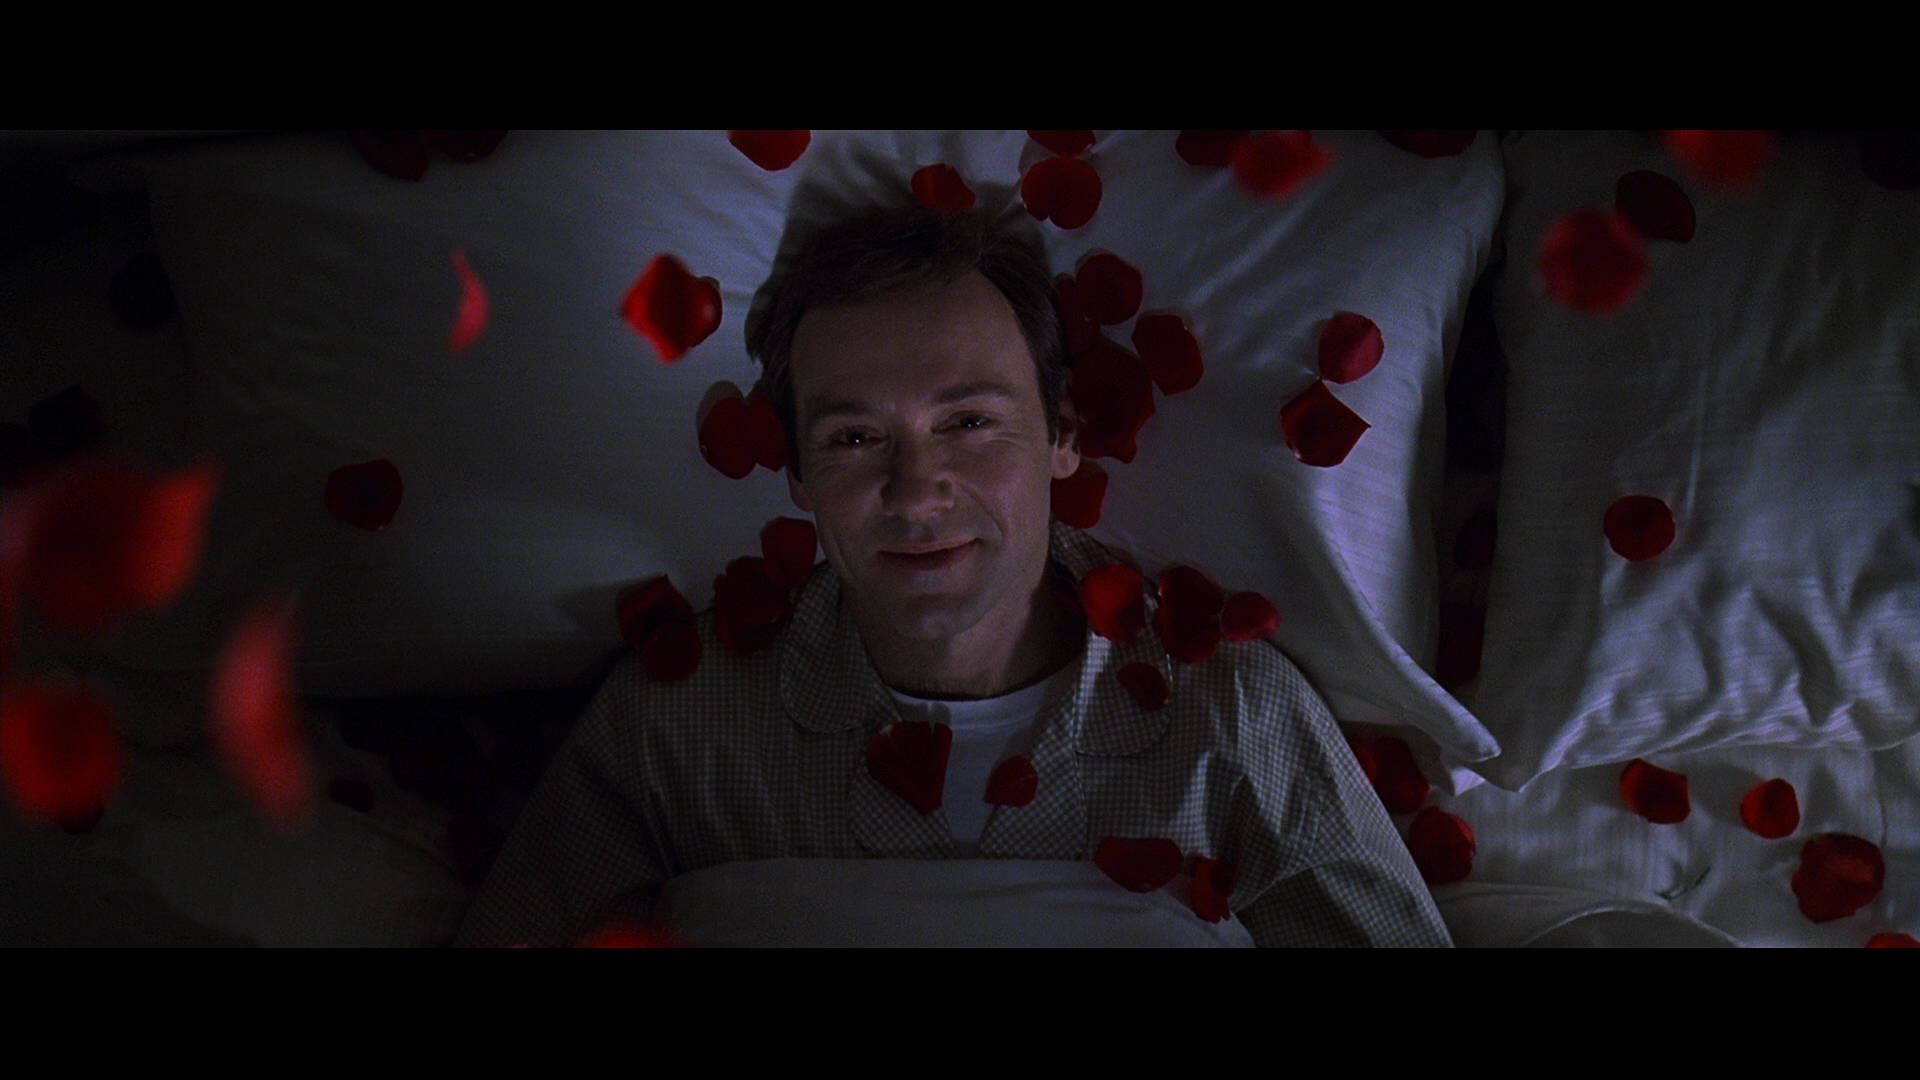 Acclaimed American actor Kevin Spacey in a scene from the movie American Beauty. Wallpaper